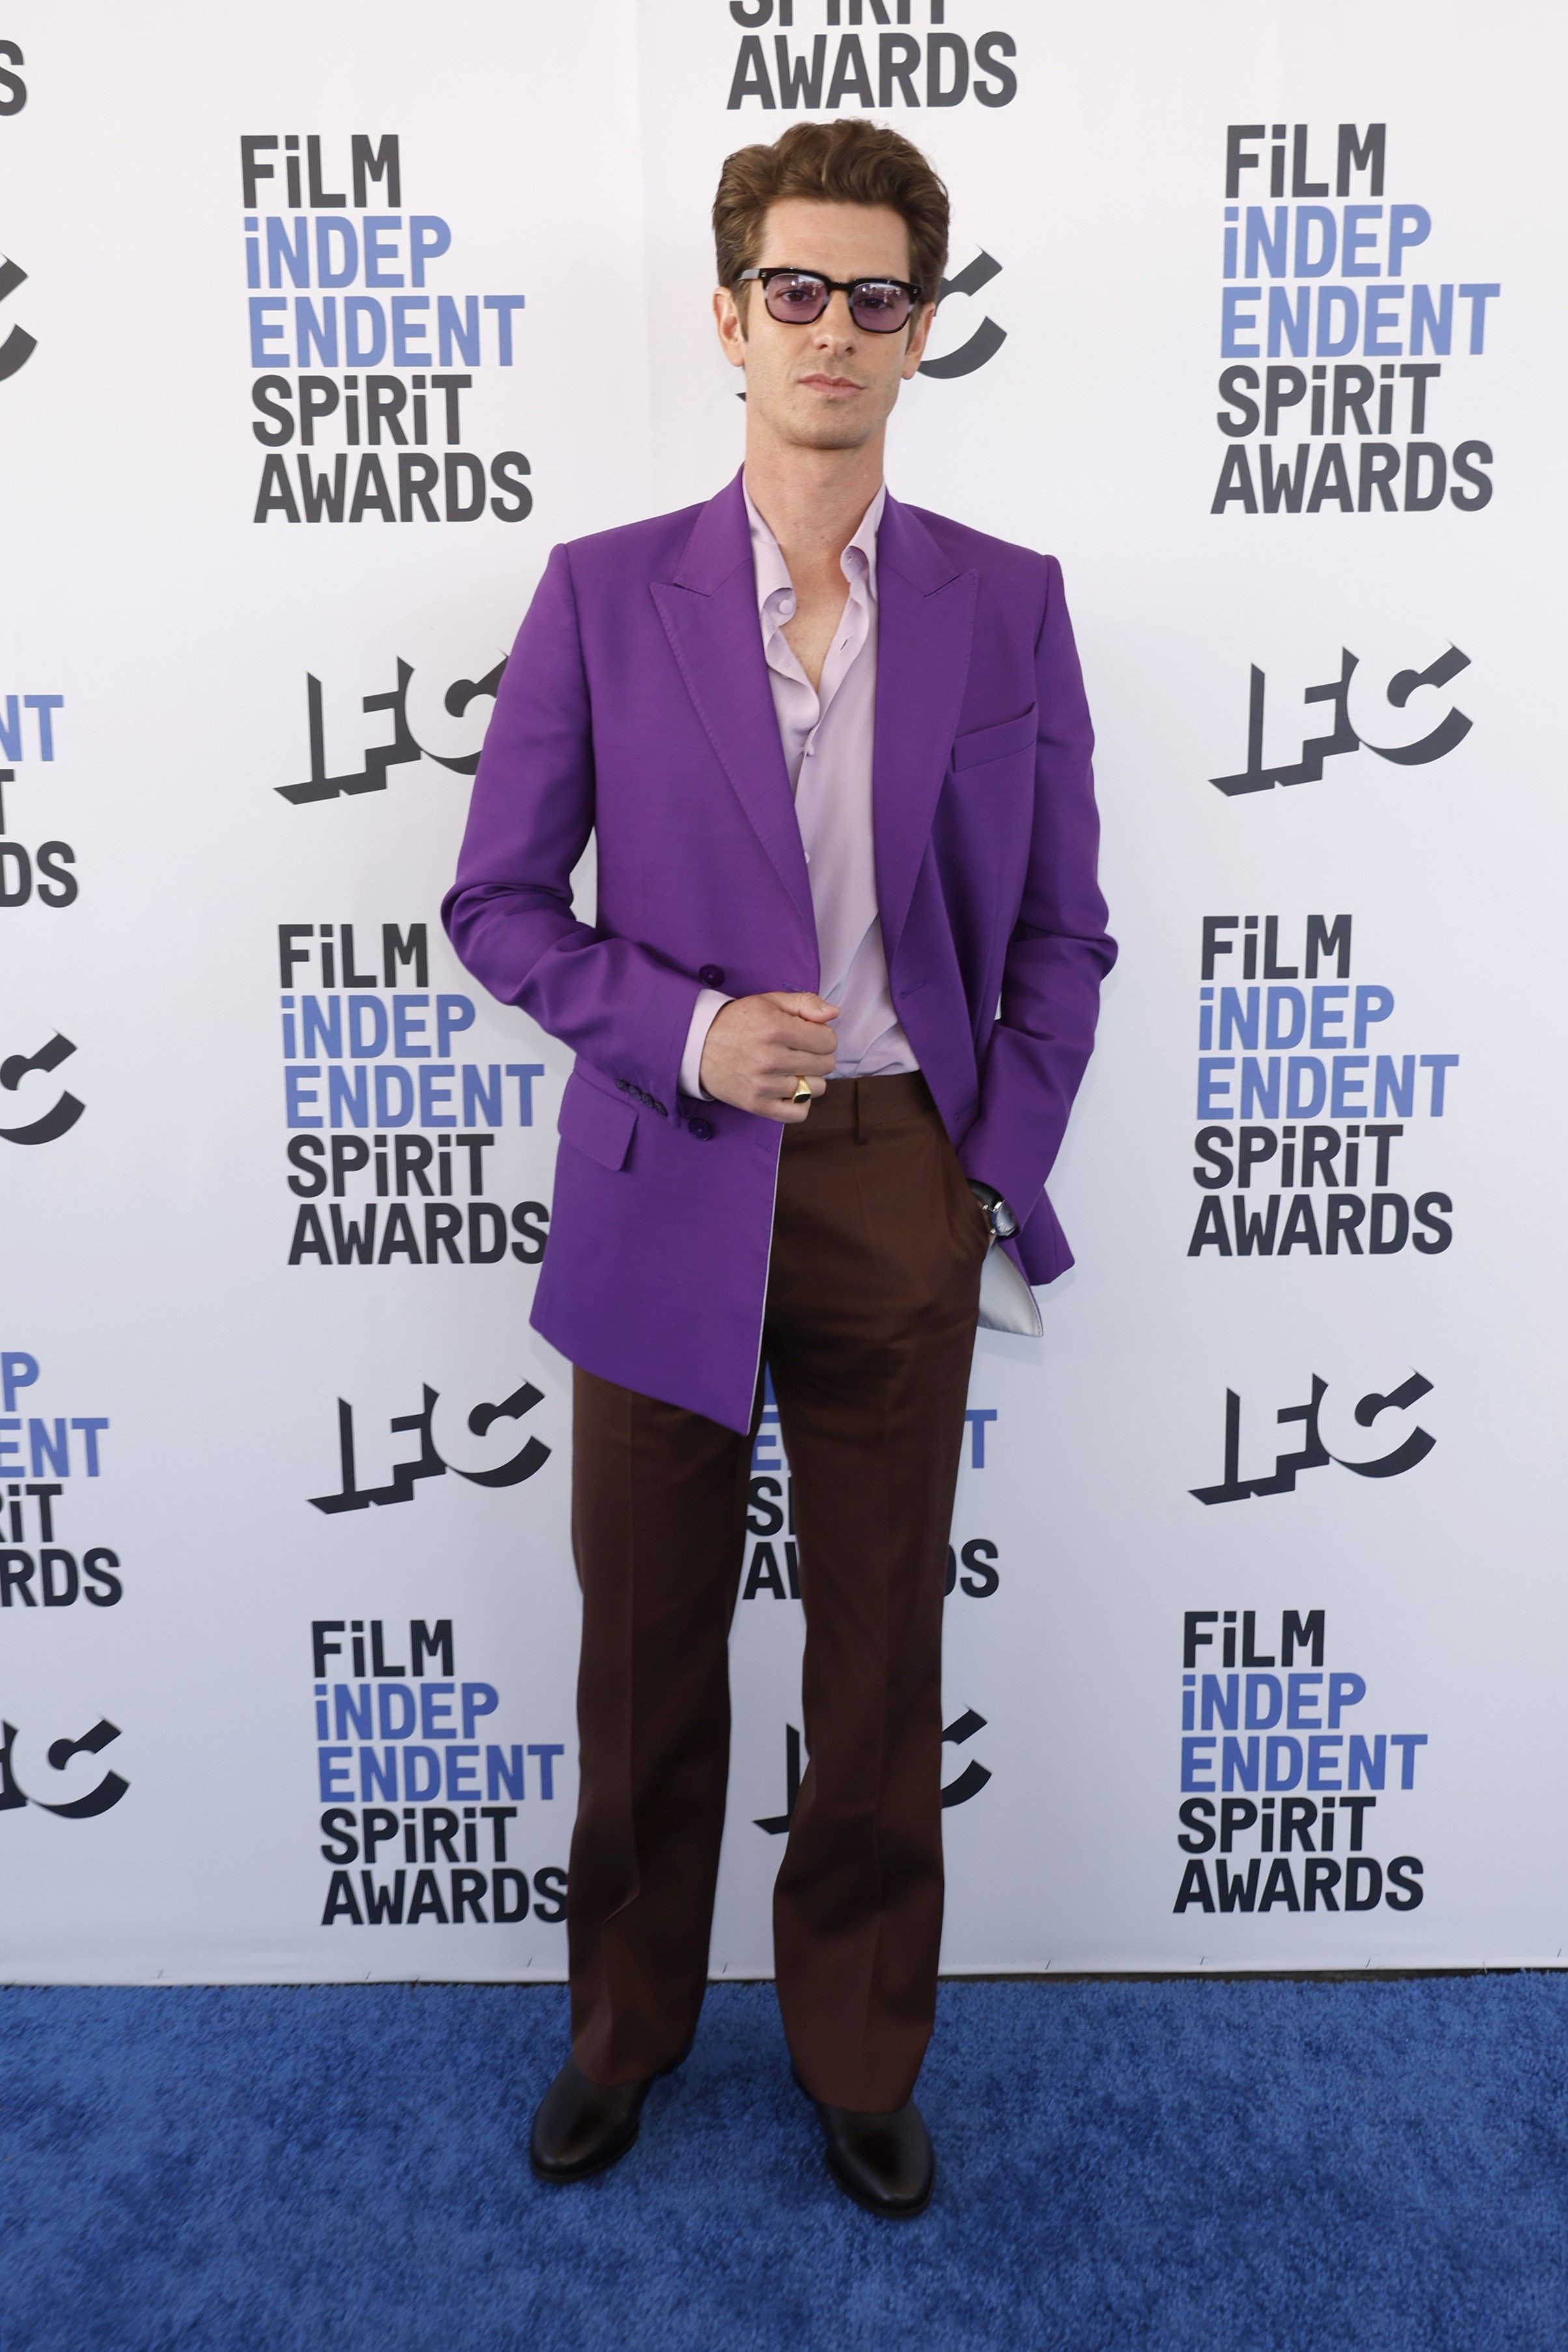 Hollywood actor Andrew Garfield rocked head-to-toe shades of purple for his red carpet appearance at the 2022 Film Independent Spirit Awards. Photo: Getty Images/AFP